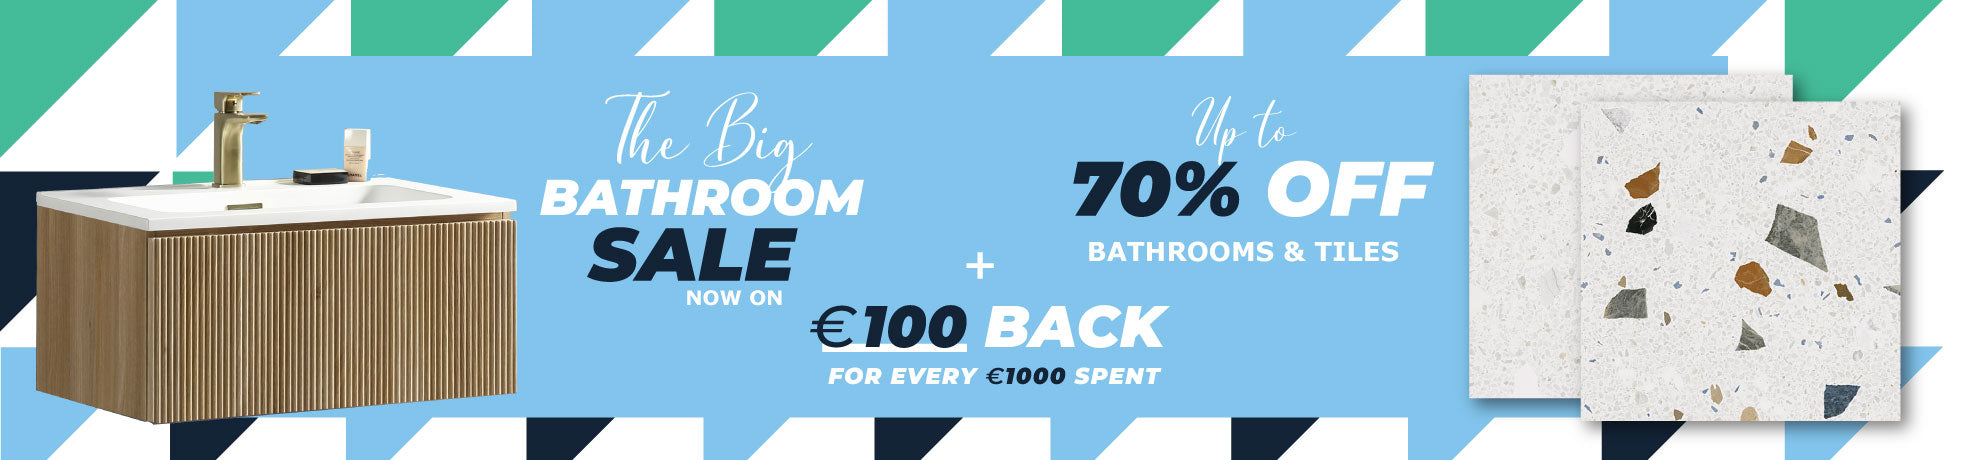 Get up to 70% Off Bathrooms and Tiles